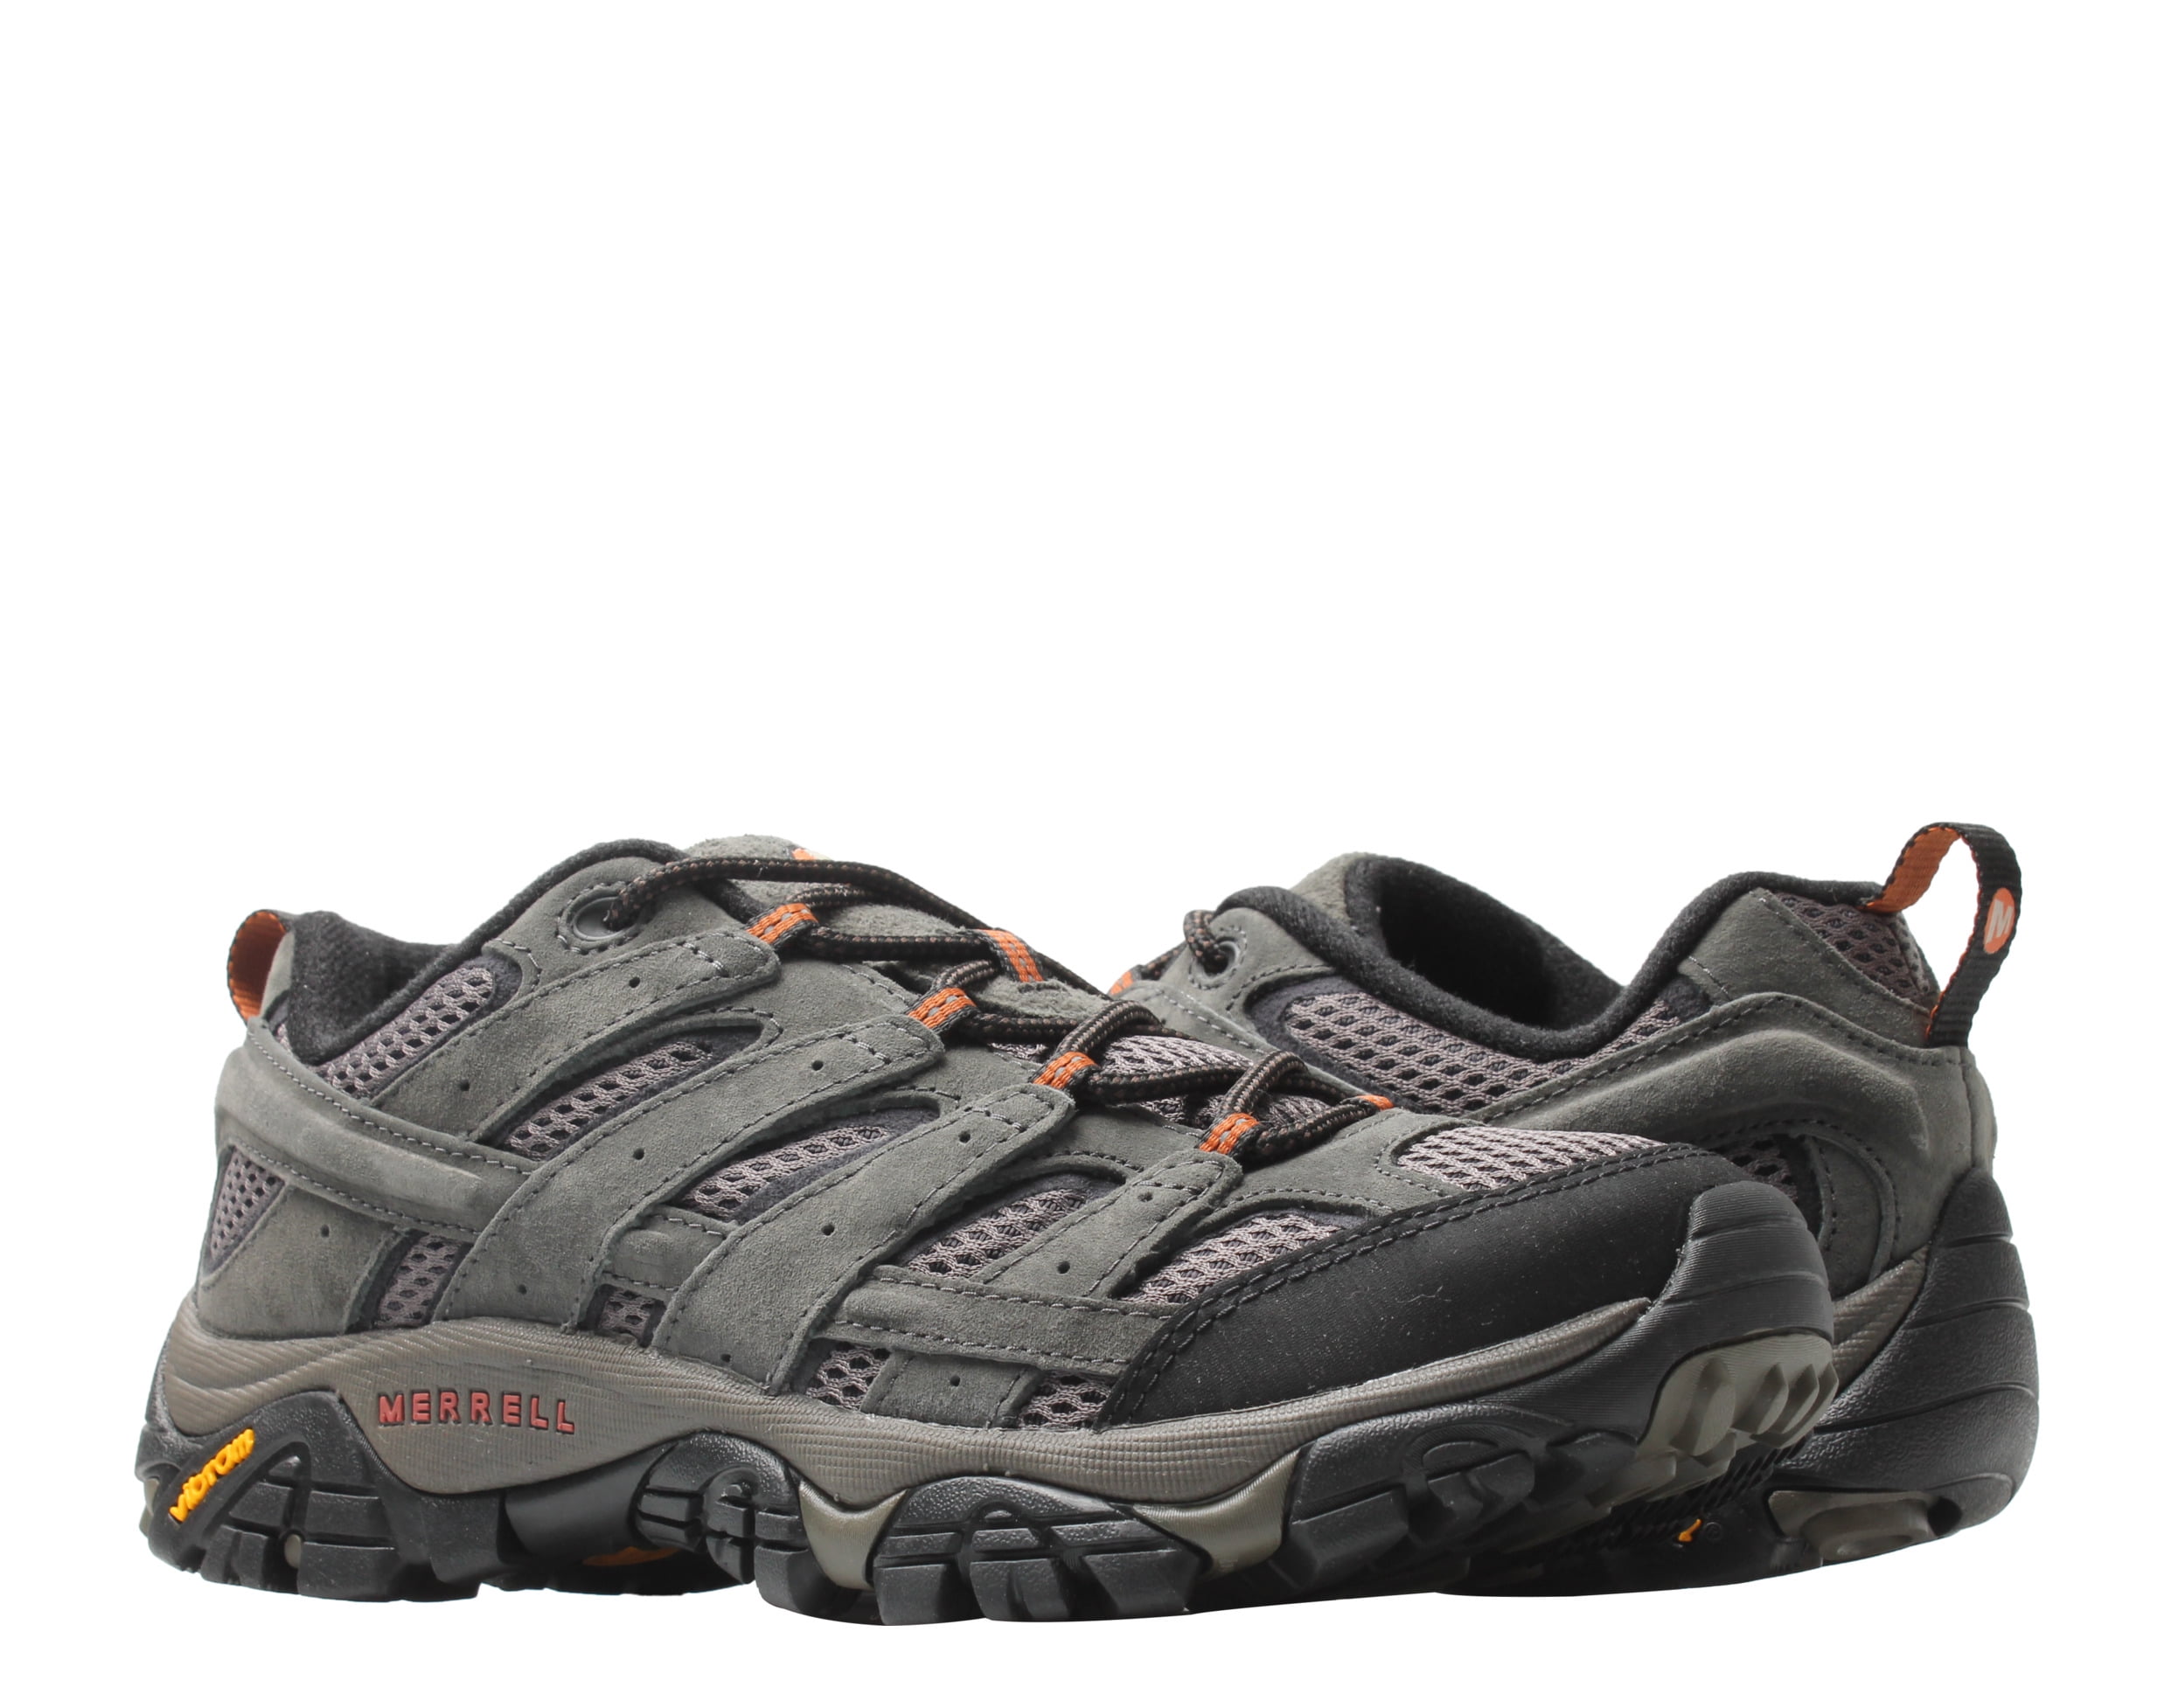 Merrell Moab 2 Ventilator Mens Walking Shoes Grey Performance Suede Hiking Boots 